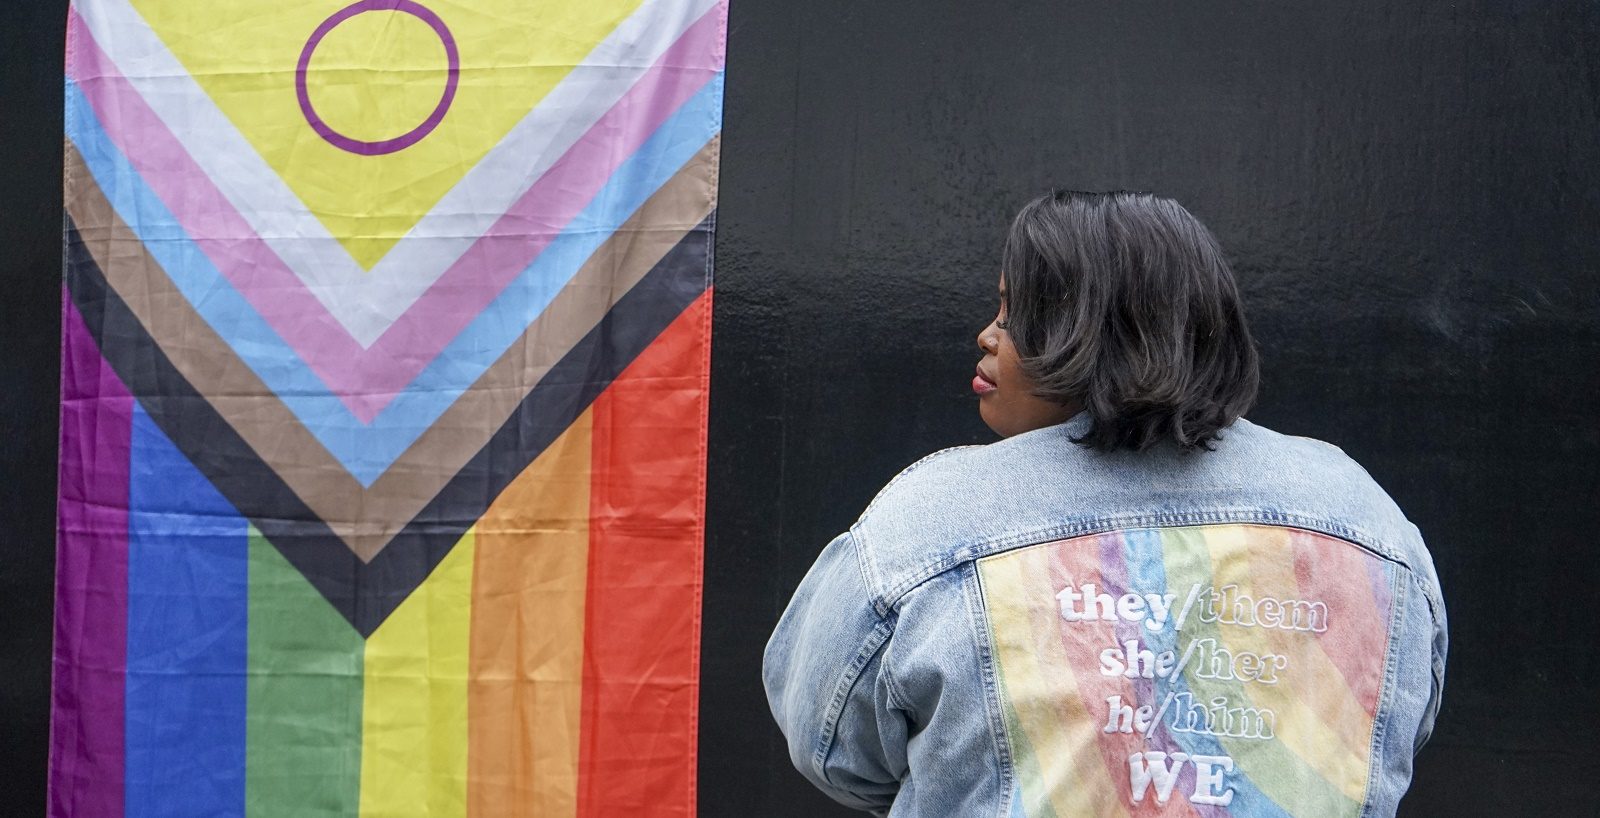 Poet Andreena Leeanne showing back of denim trucker jacket with rainbow flag embroidered with slogan they/them she/her he/him WE faces progress flag - photo Andreena Leanne